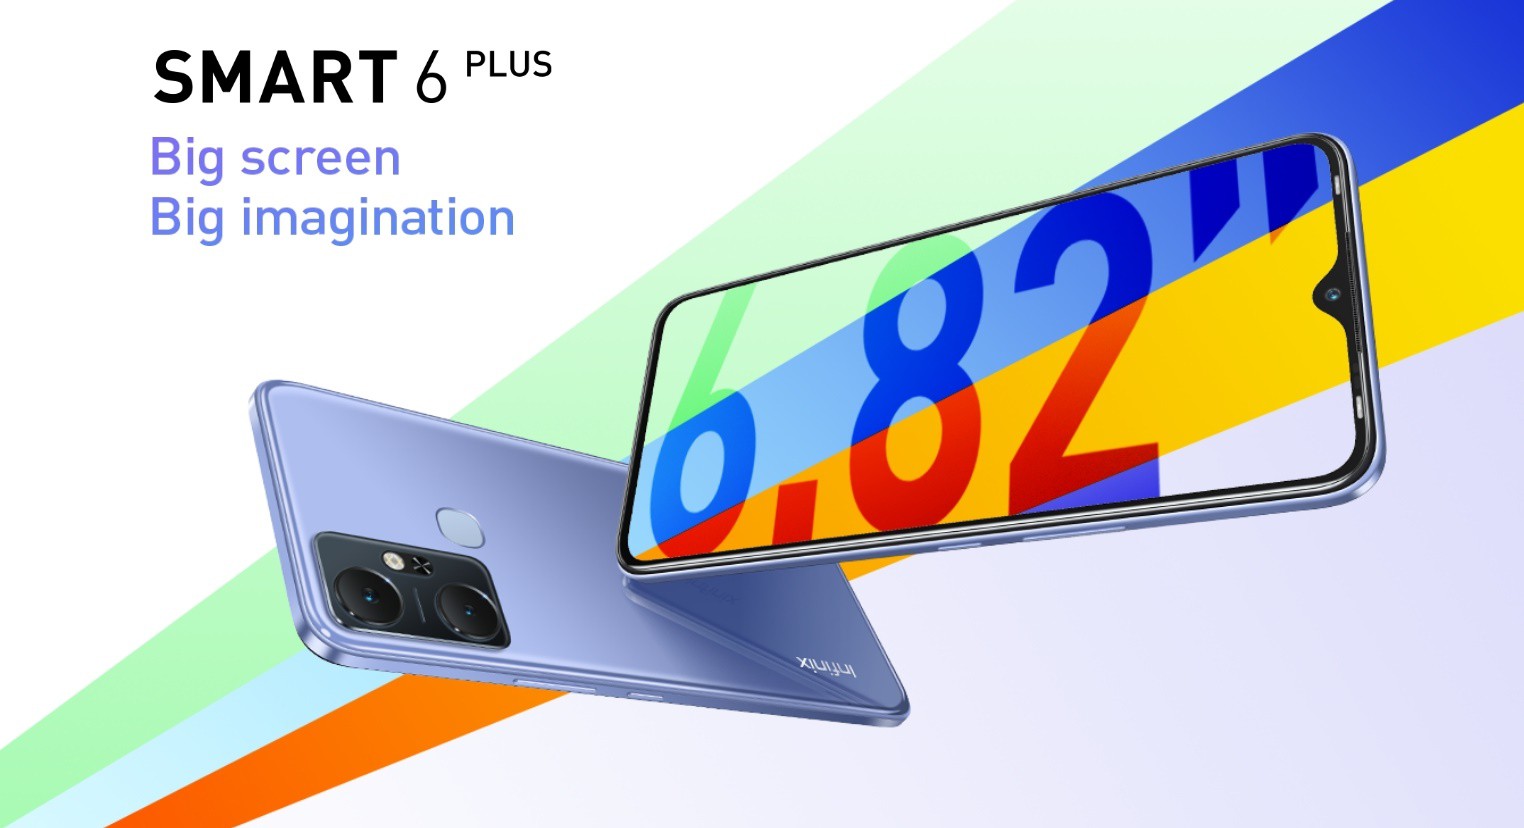 New Edition of Infinix Smart 6 Plus with 6.82" screen announced